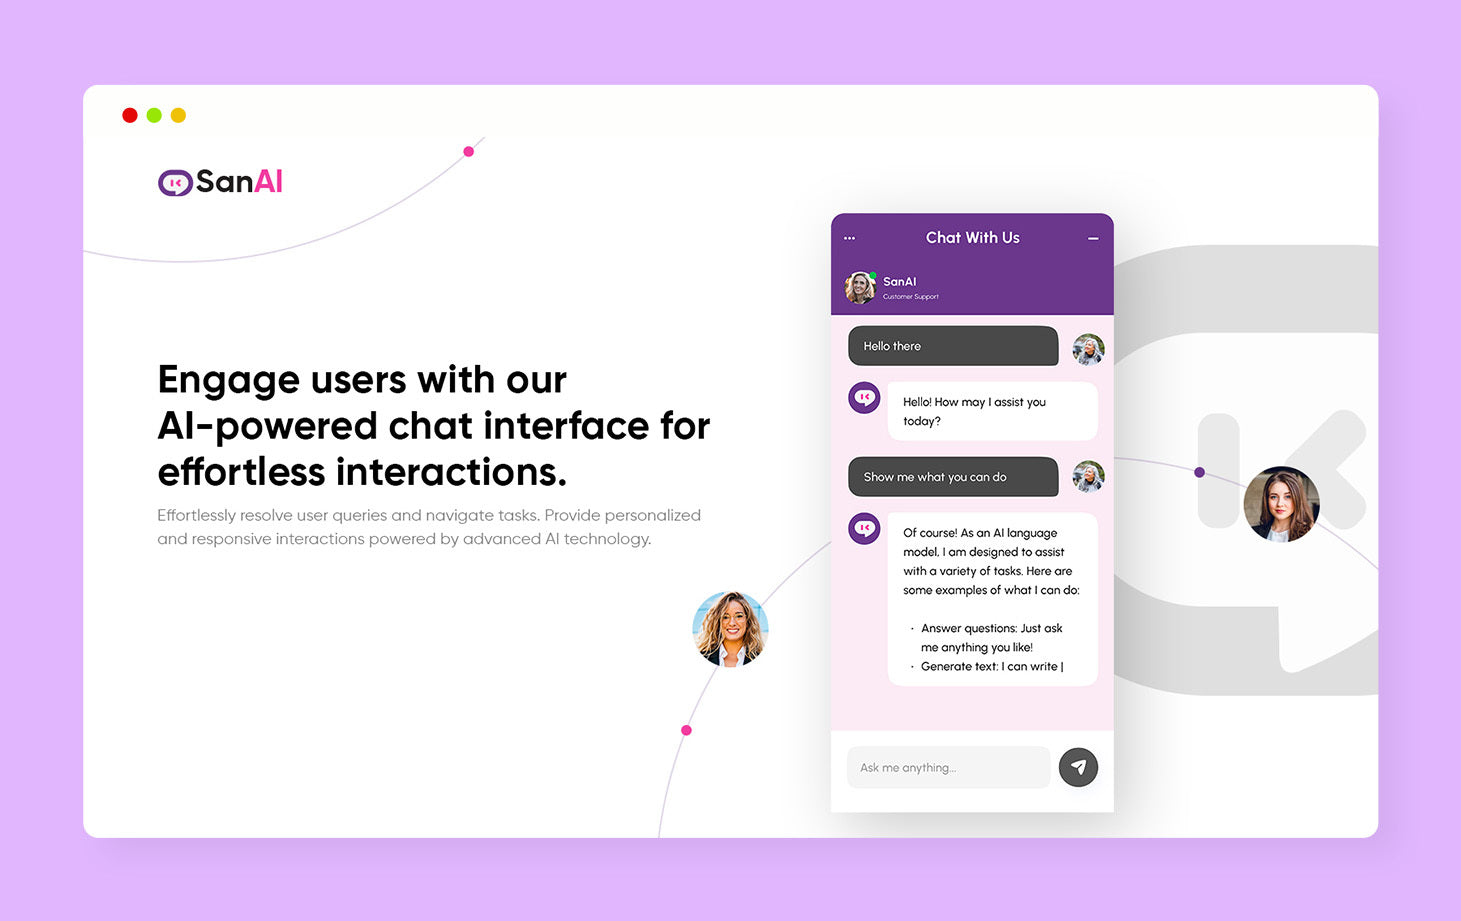 Boost Customer Engagement With SanAI - Shopify Sales Chatbot